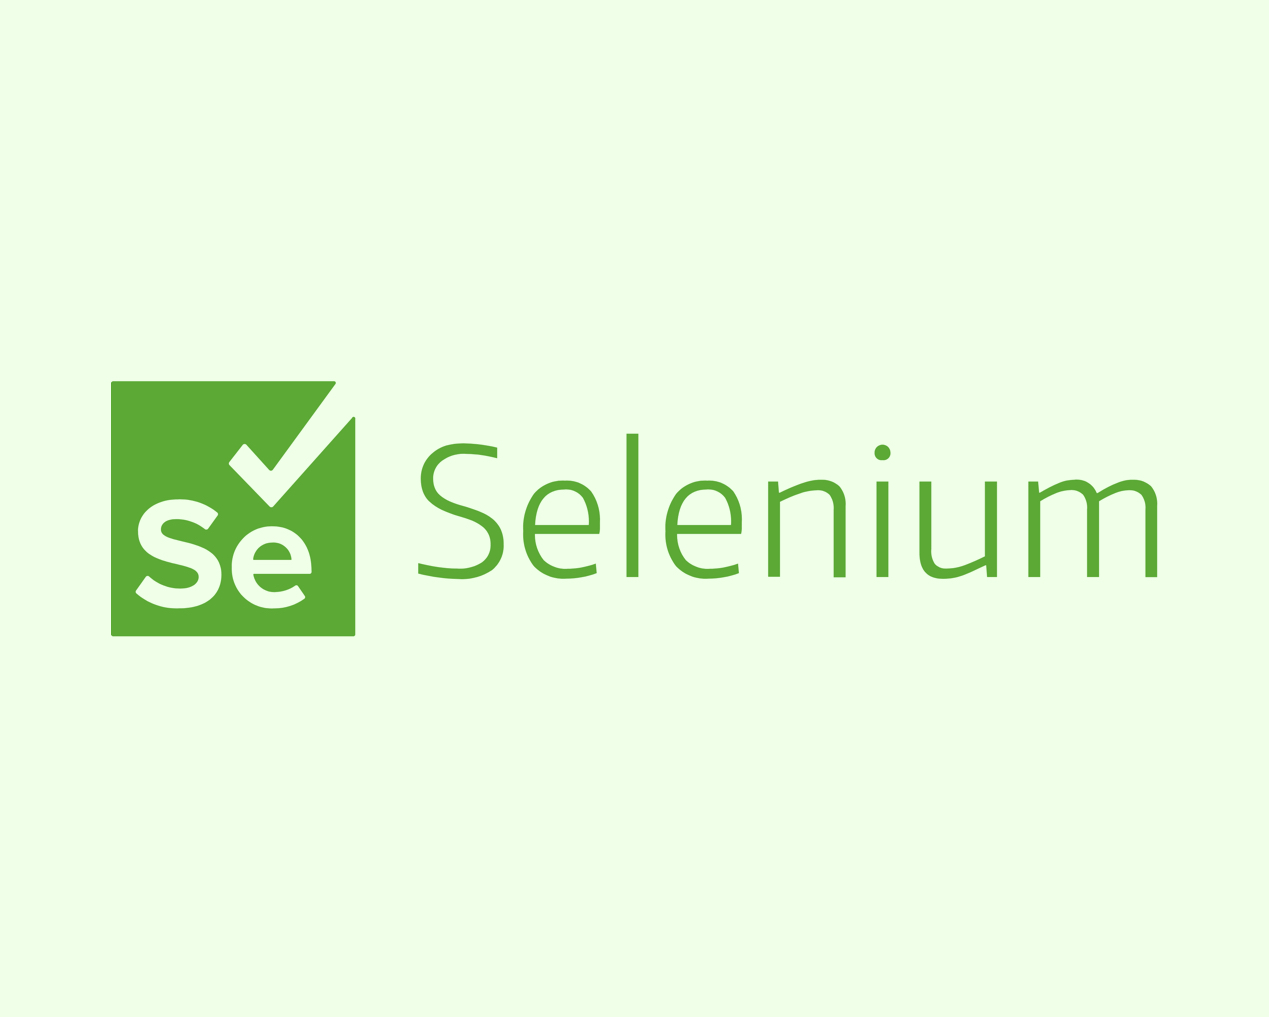 Protractor Tutorial: Handling Timeouts With Selenium